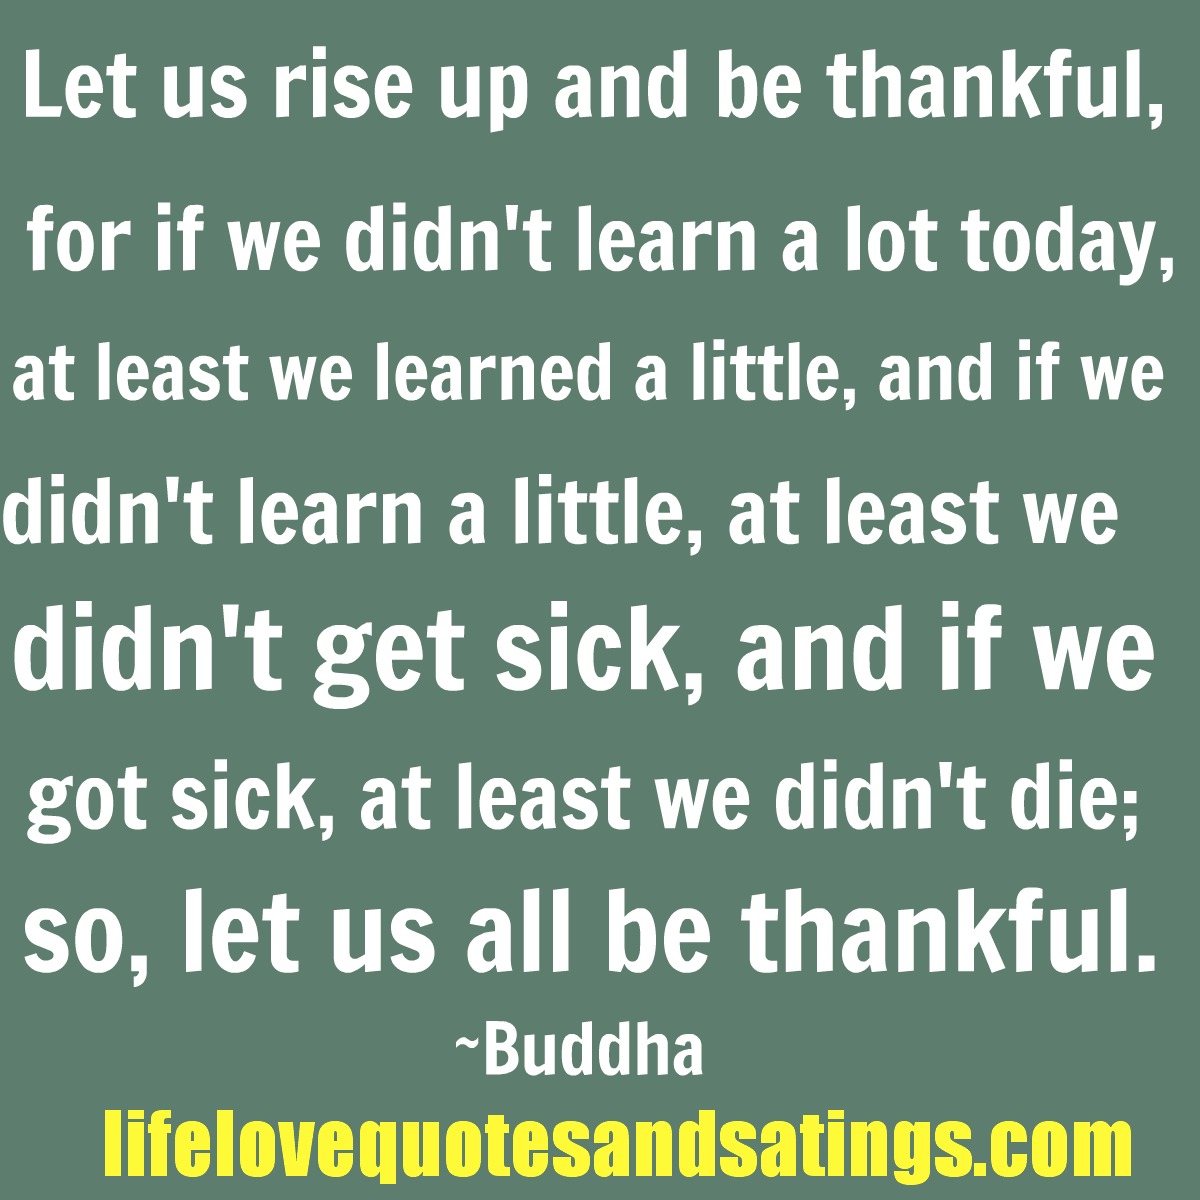 Quotes And Sayings Being Thankful. QuotesGram